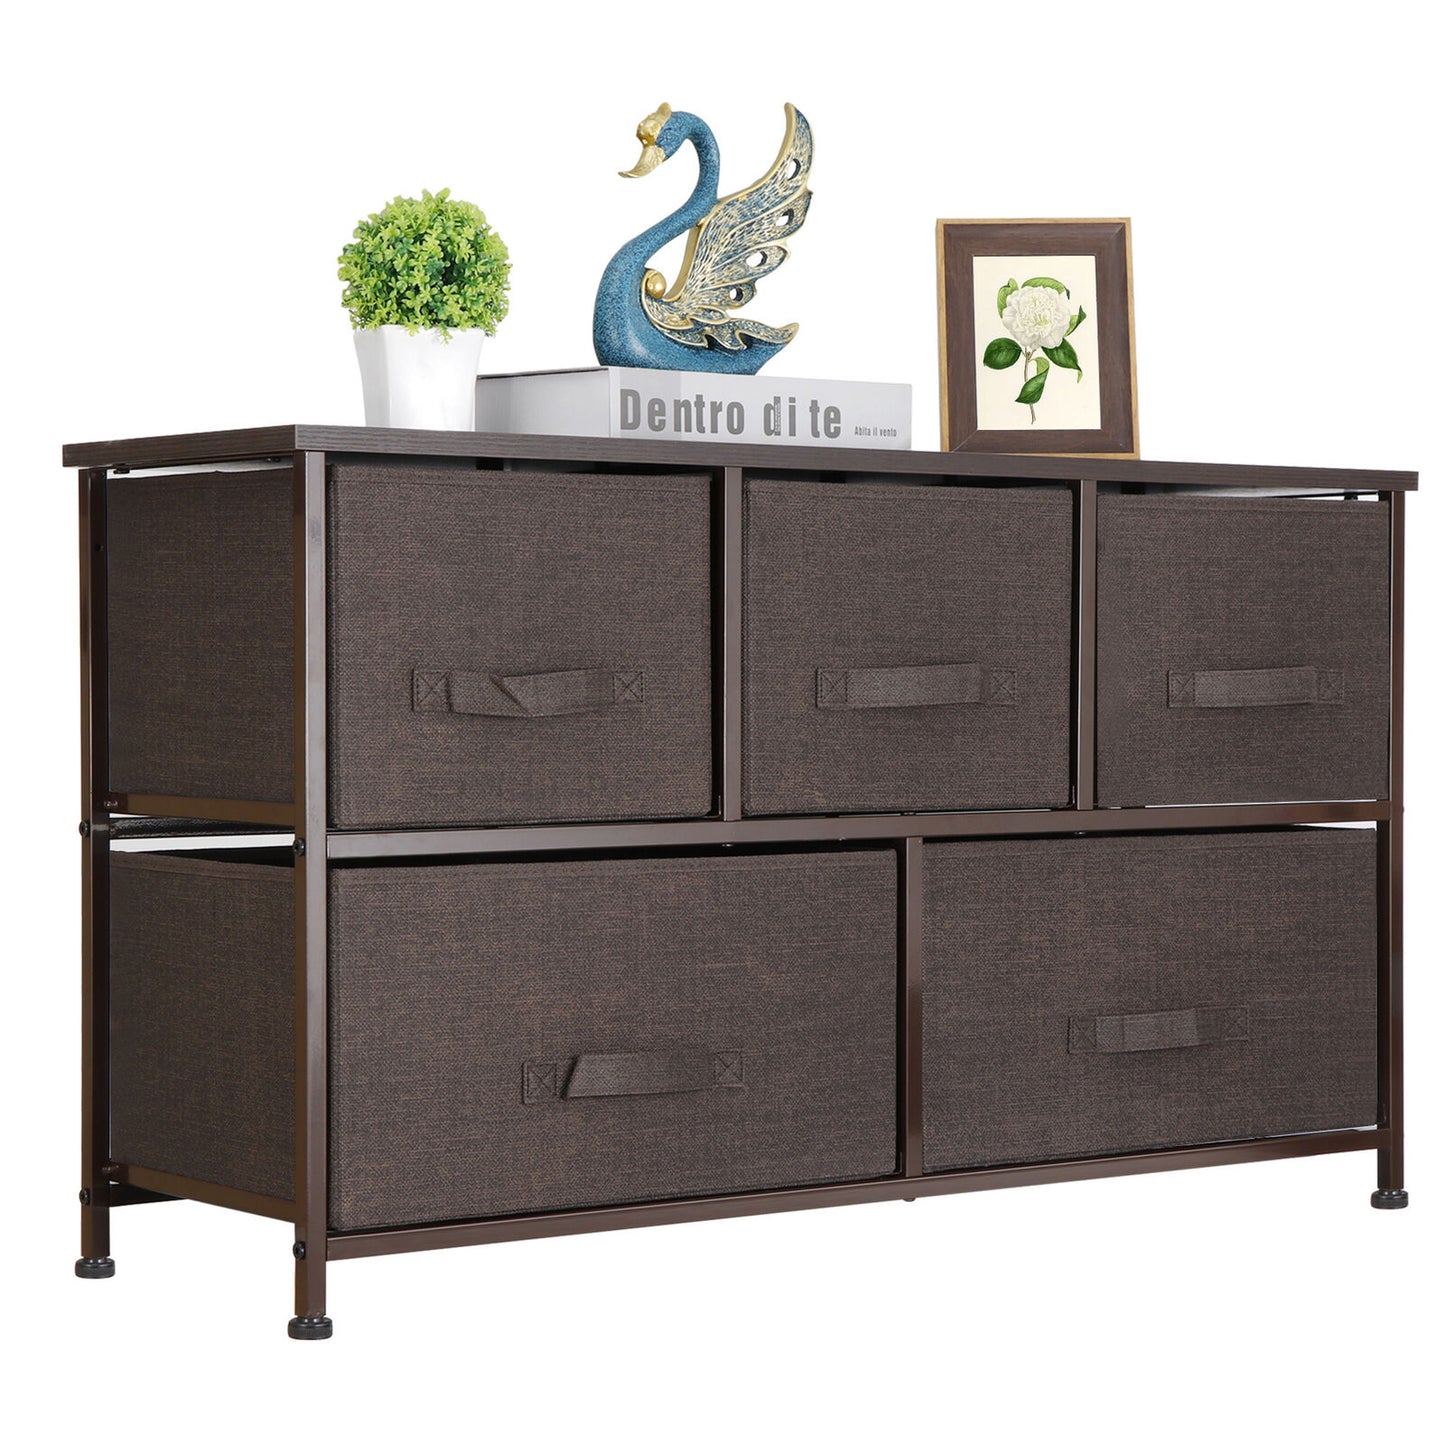 5 Drawers Extra Wide Dresser Storage Tower Chest Closets Bedroom Entryway Brown